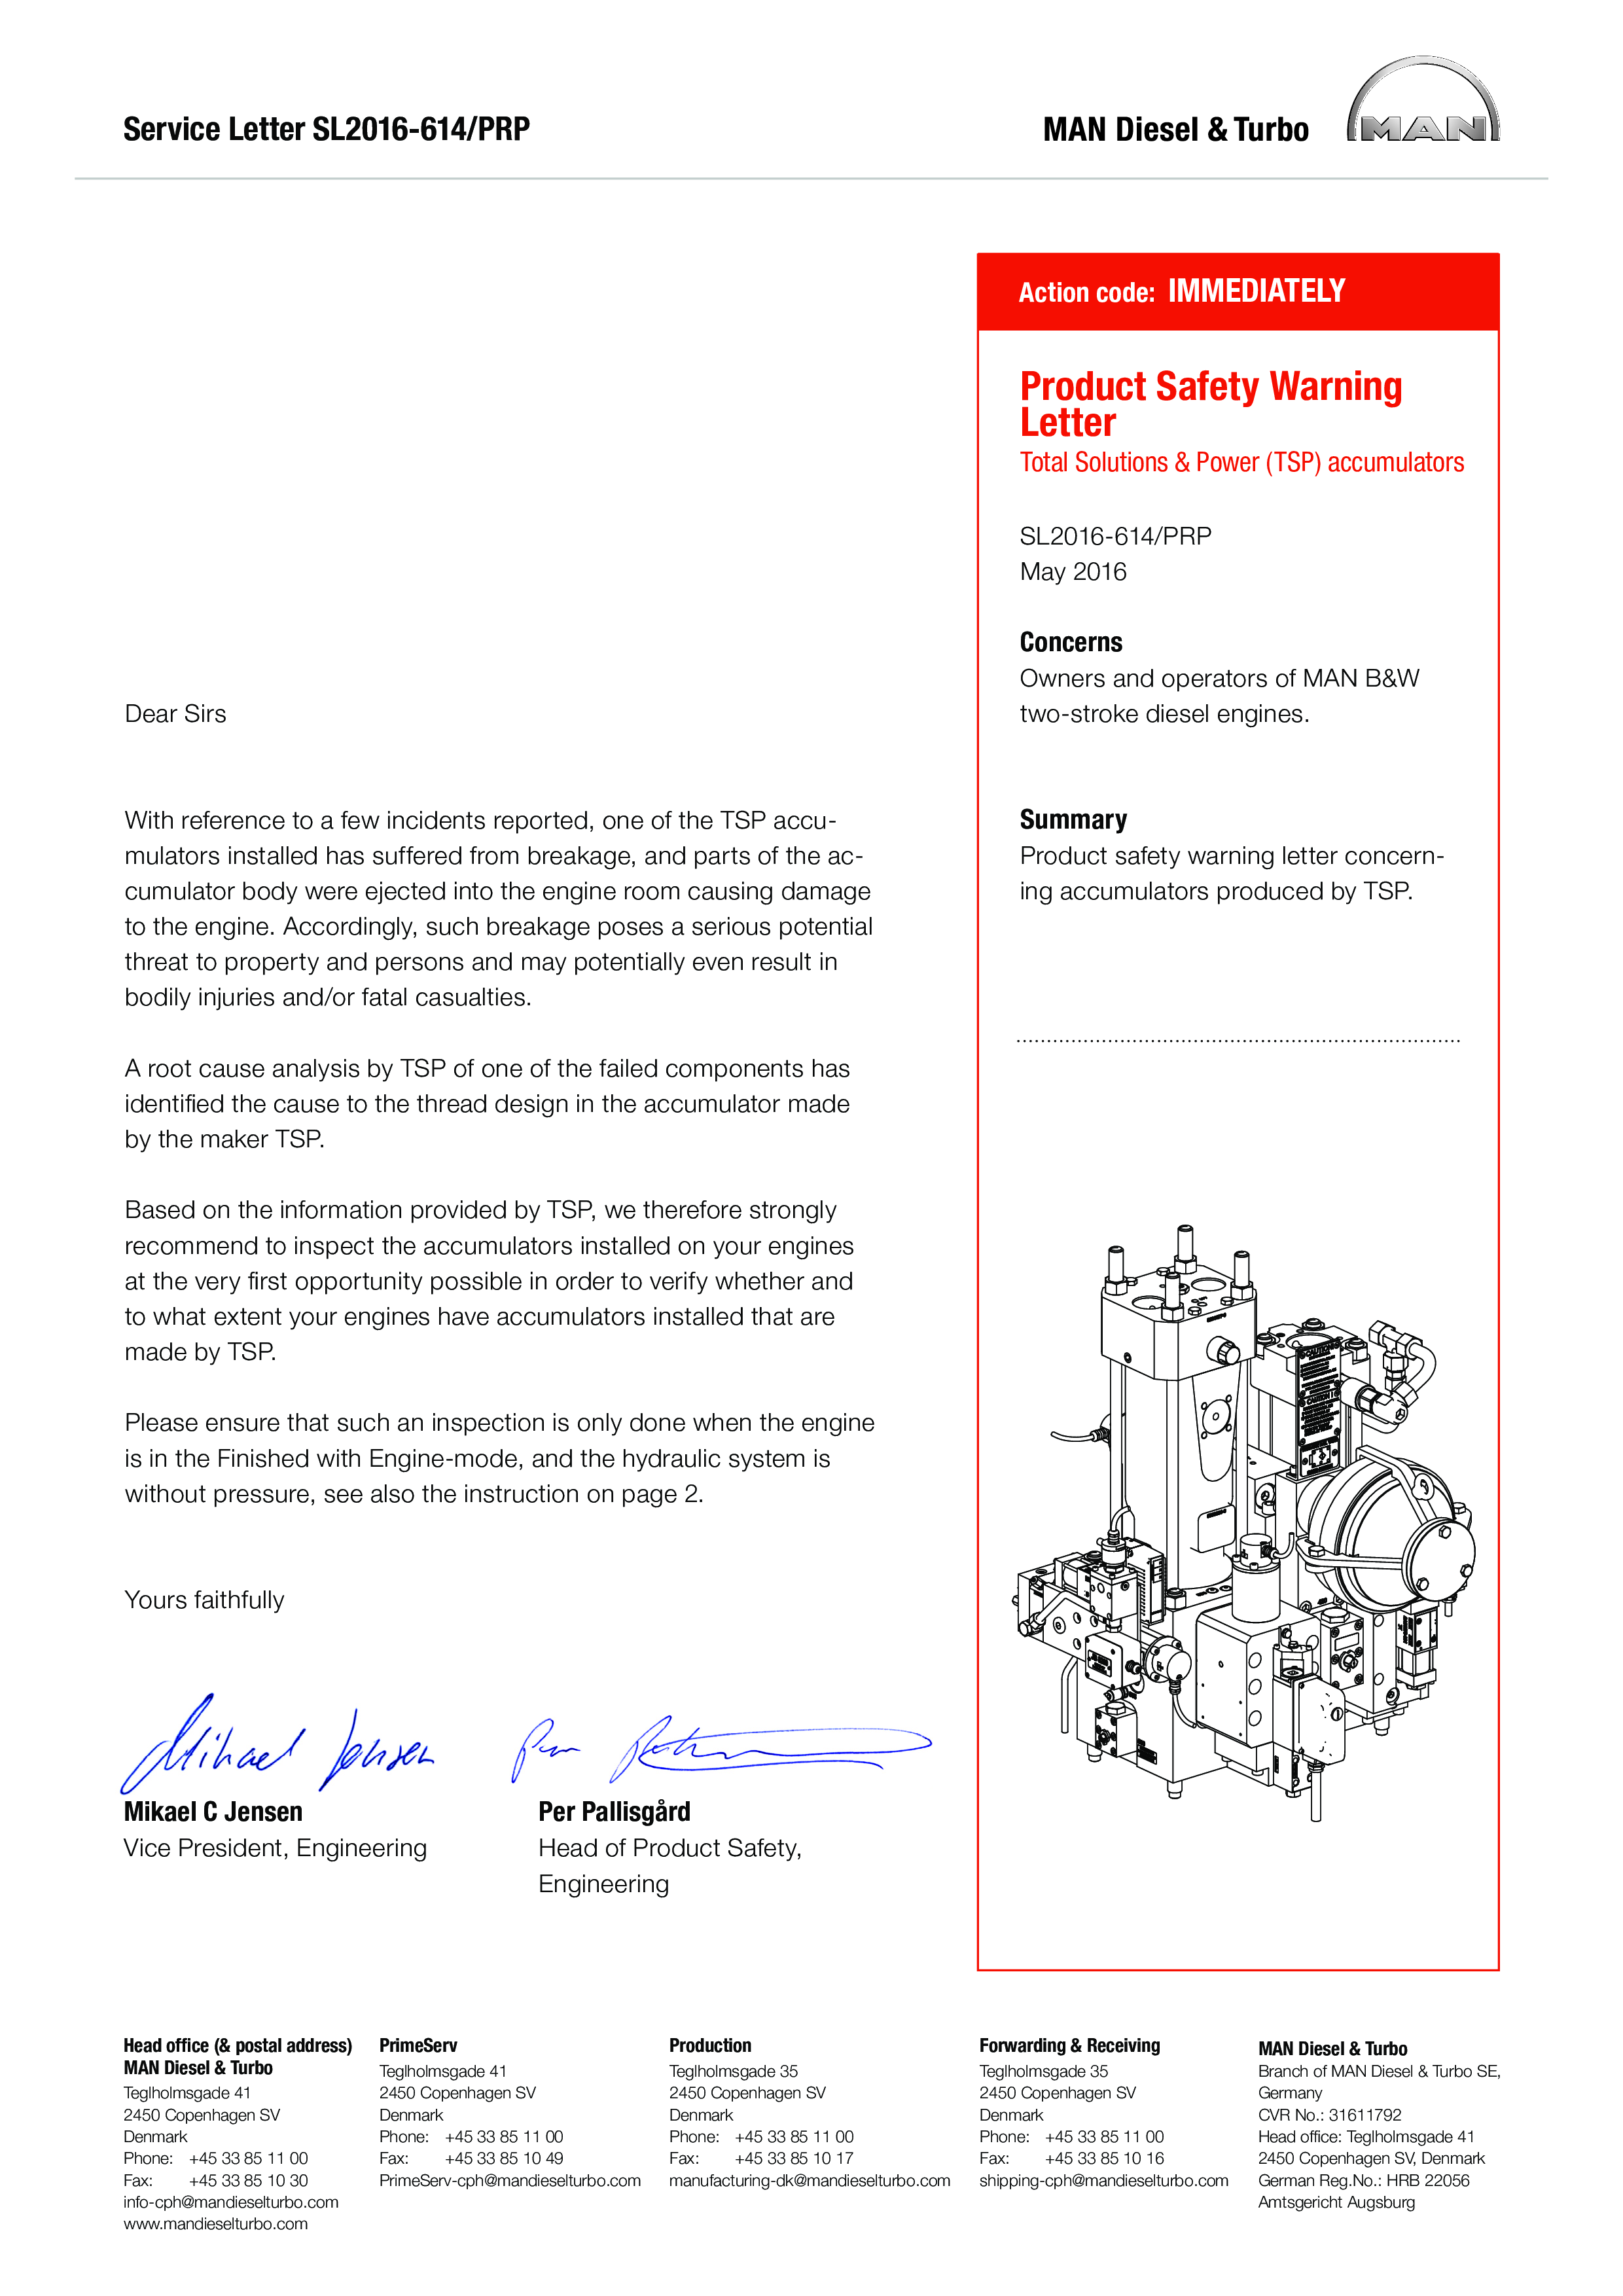 Product Safety Warning Letter main image